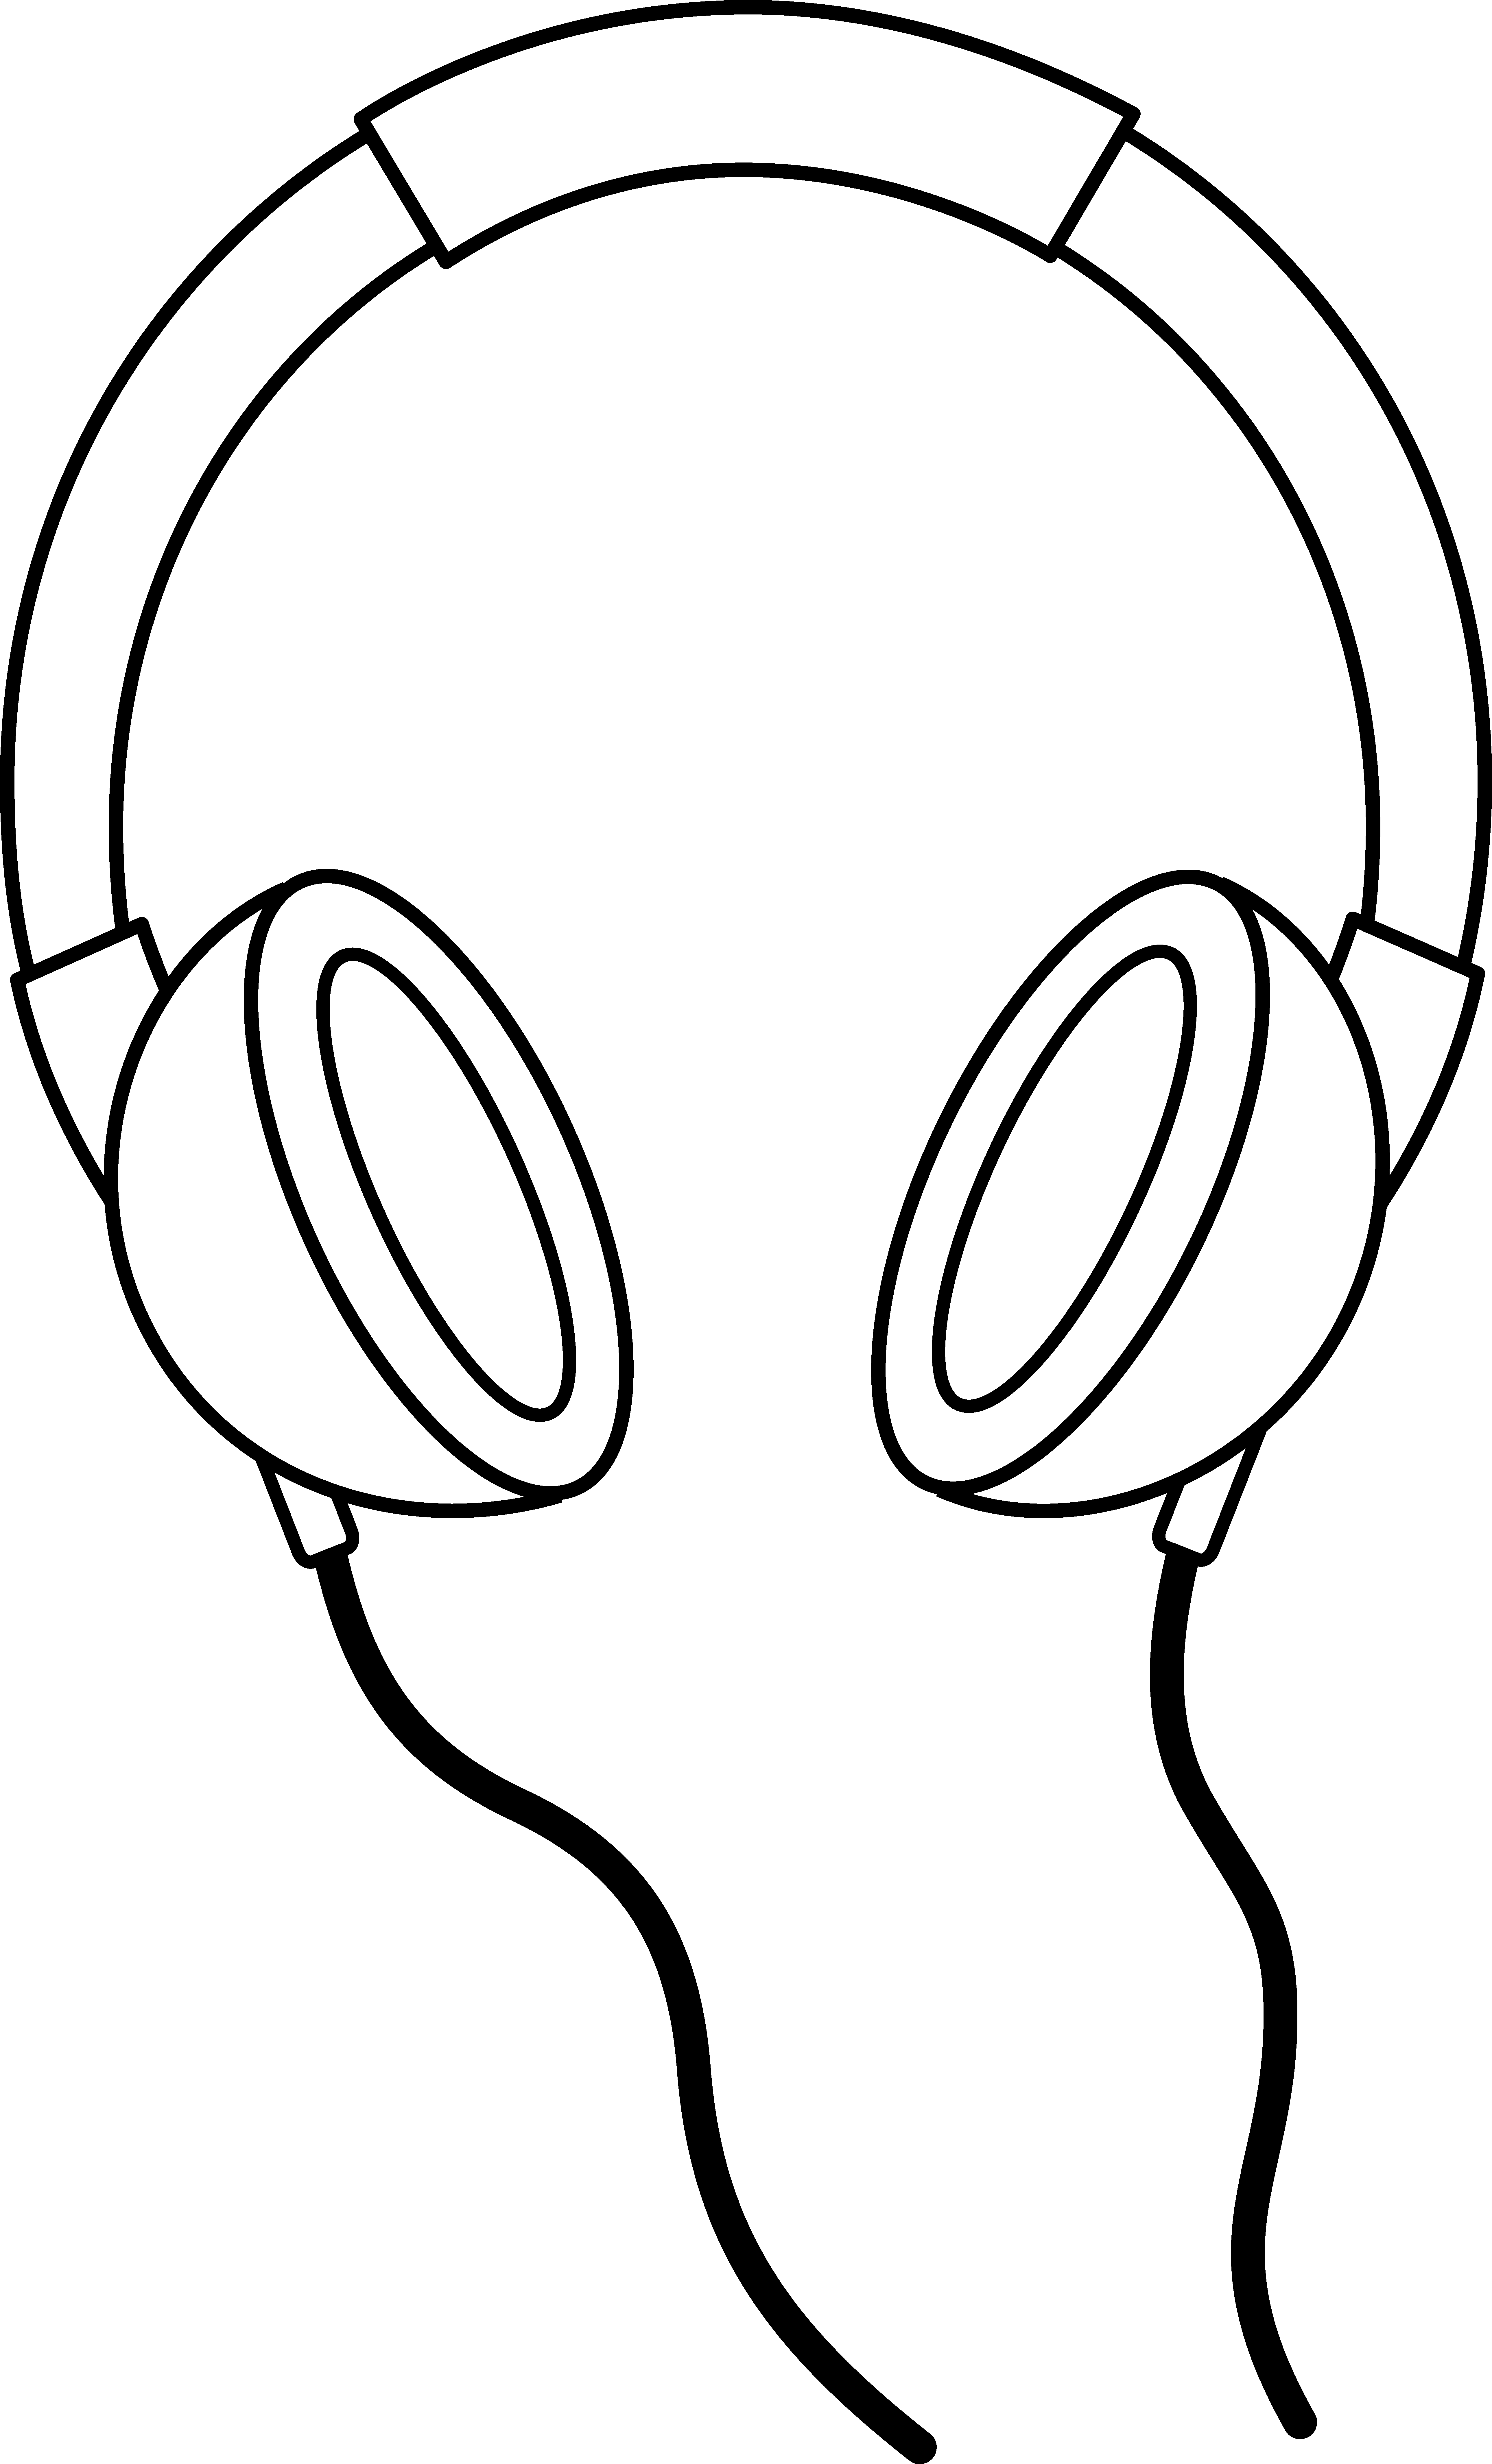 Free Headphones Clipart Black And White, Download Free Clip